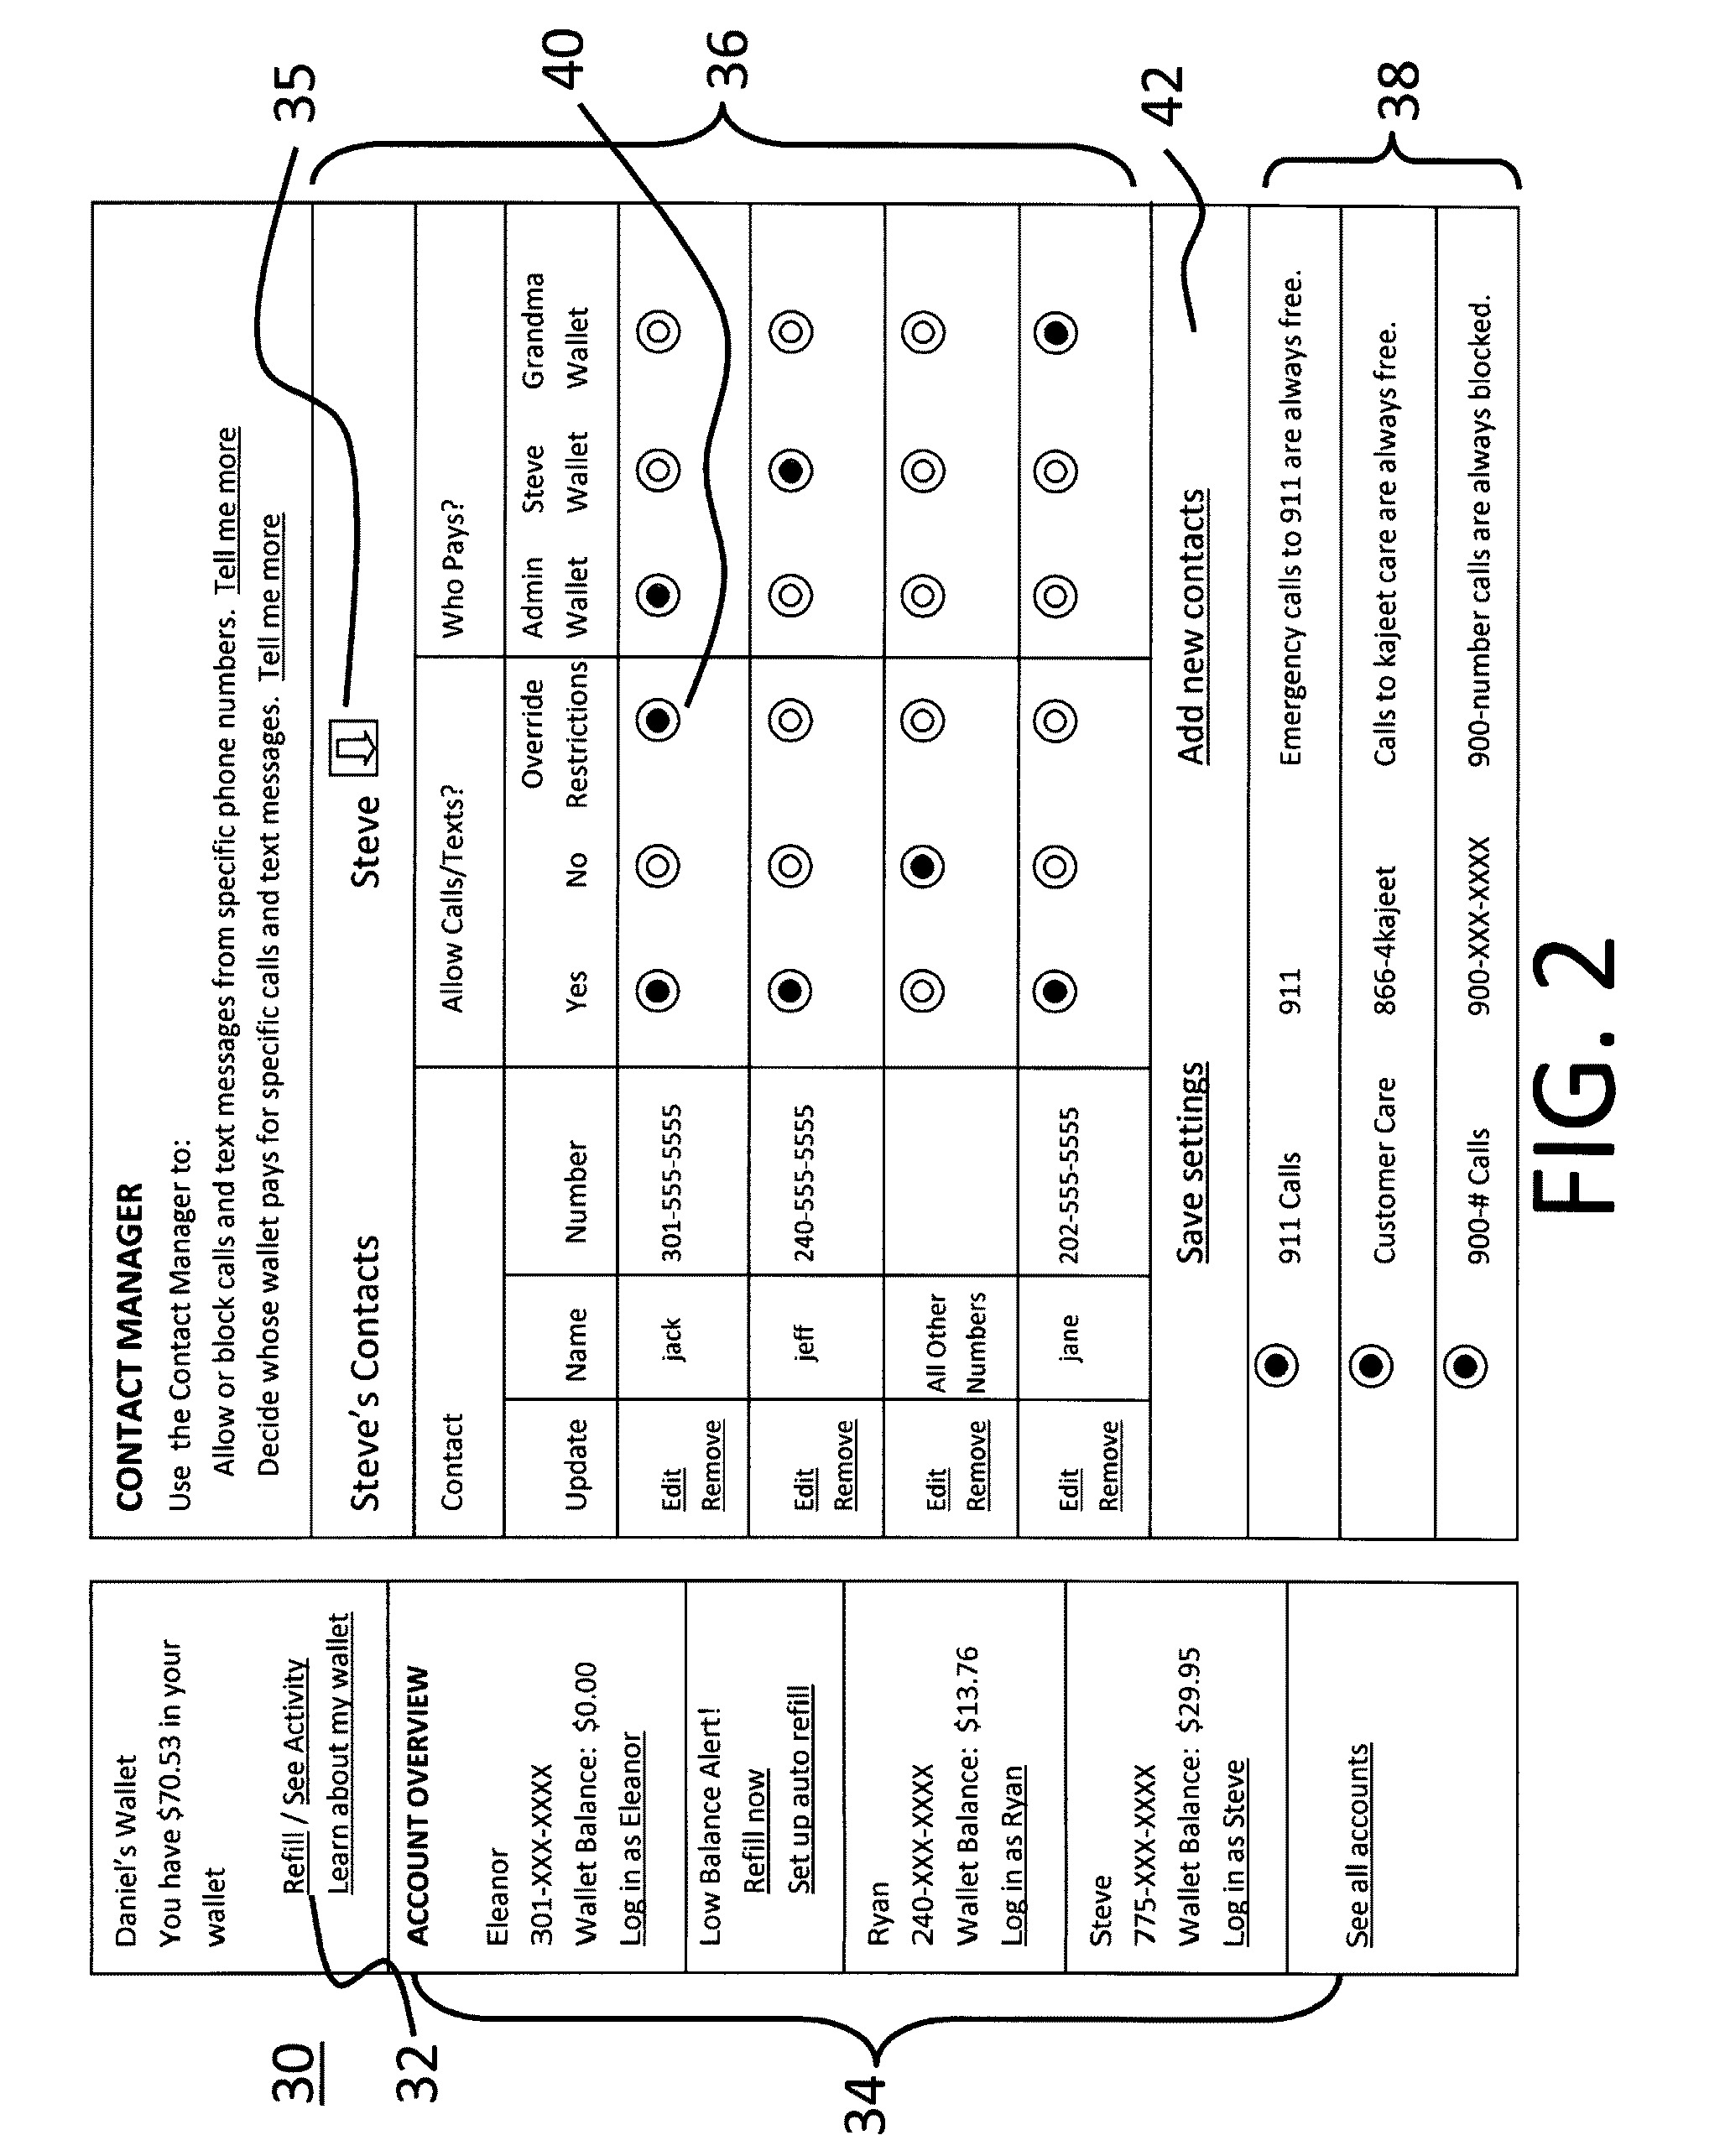 System and methods for managing the utilization of a communications device